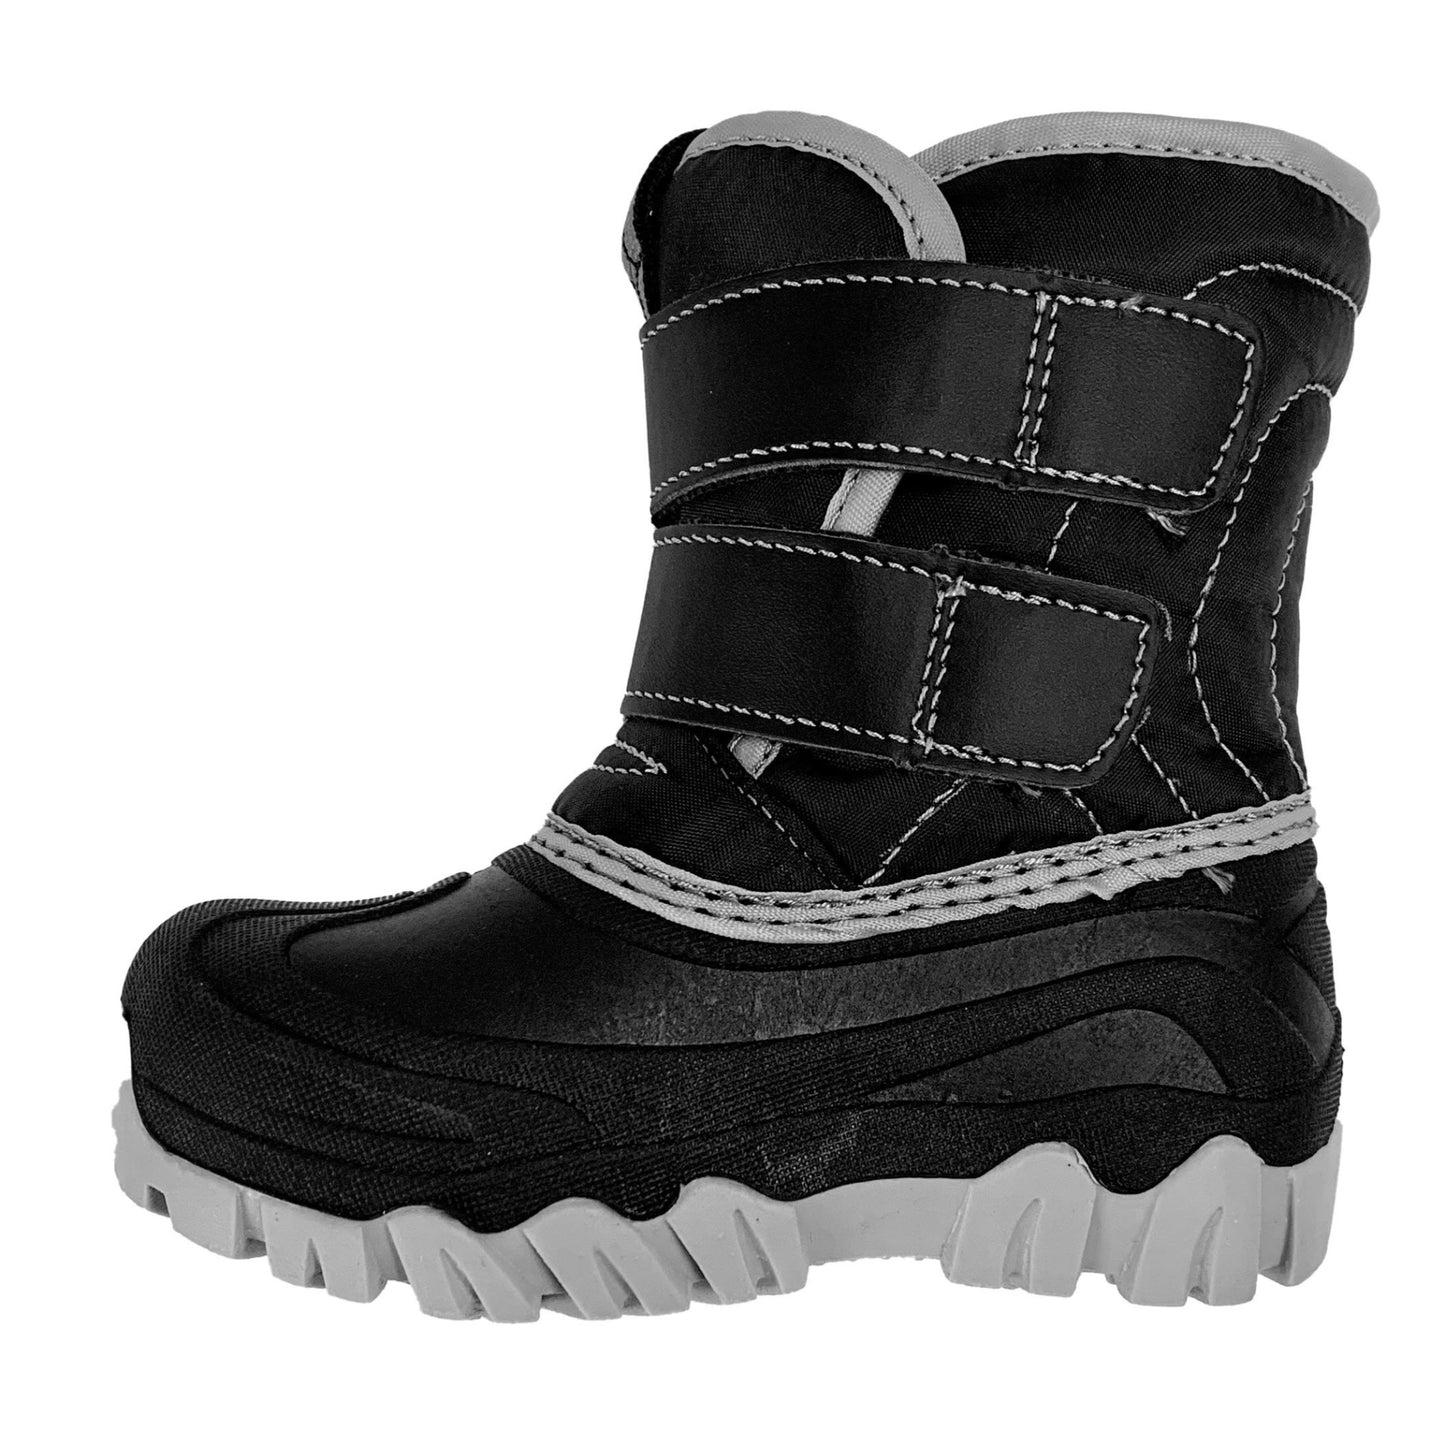 SITKA - Black/Charcoal Winter Boots